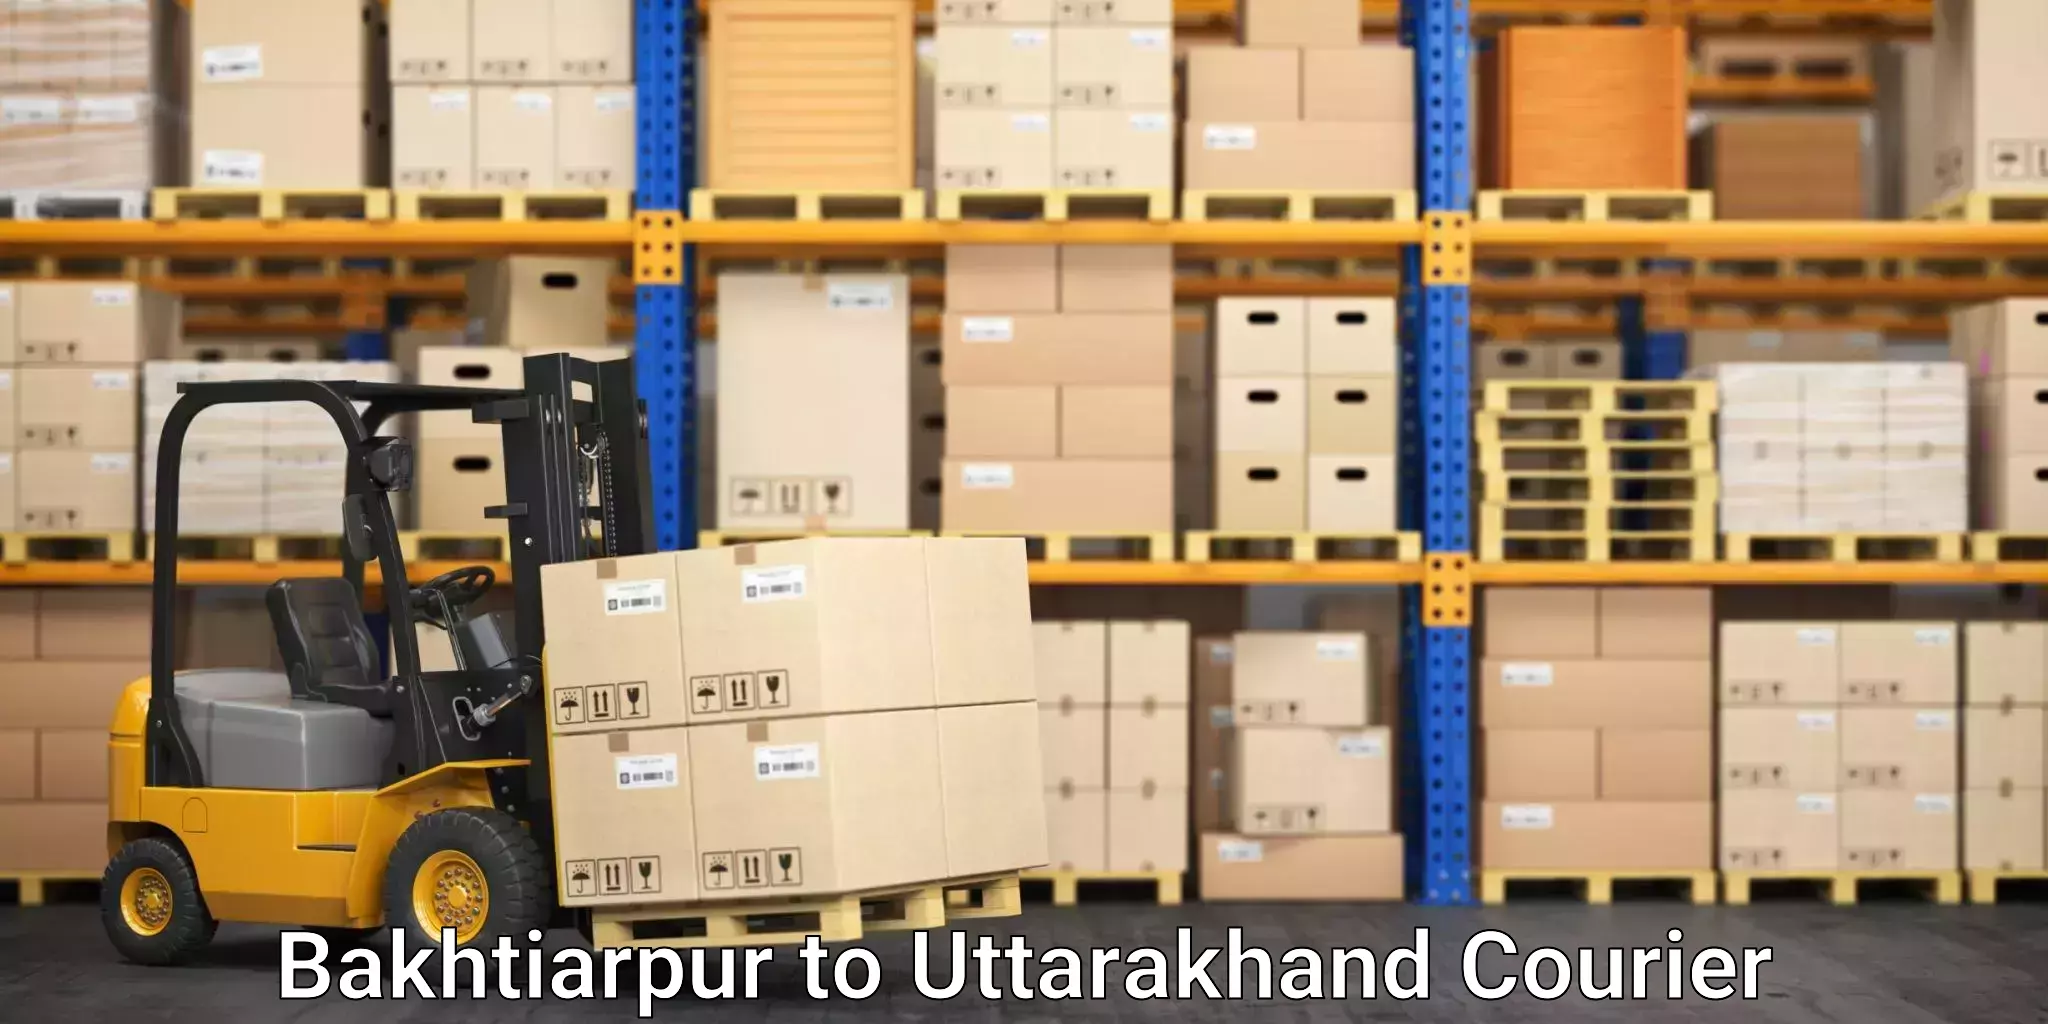 Furniture moving specialists Bakhtiarpur to Roorkee